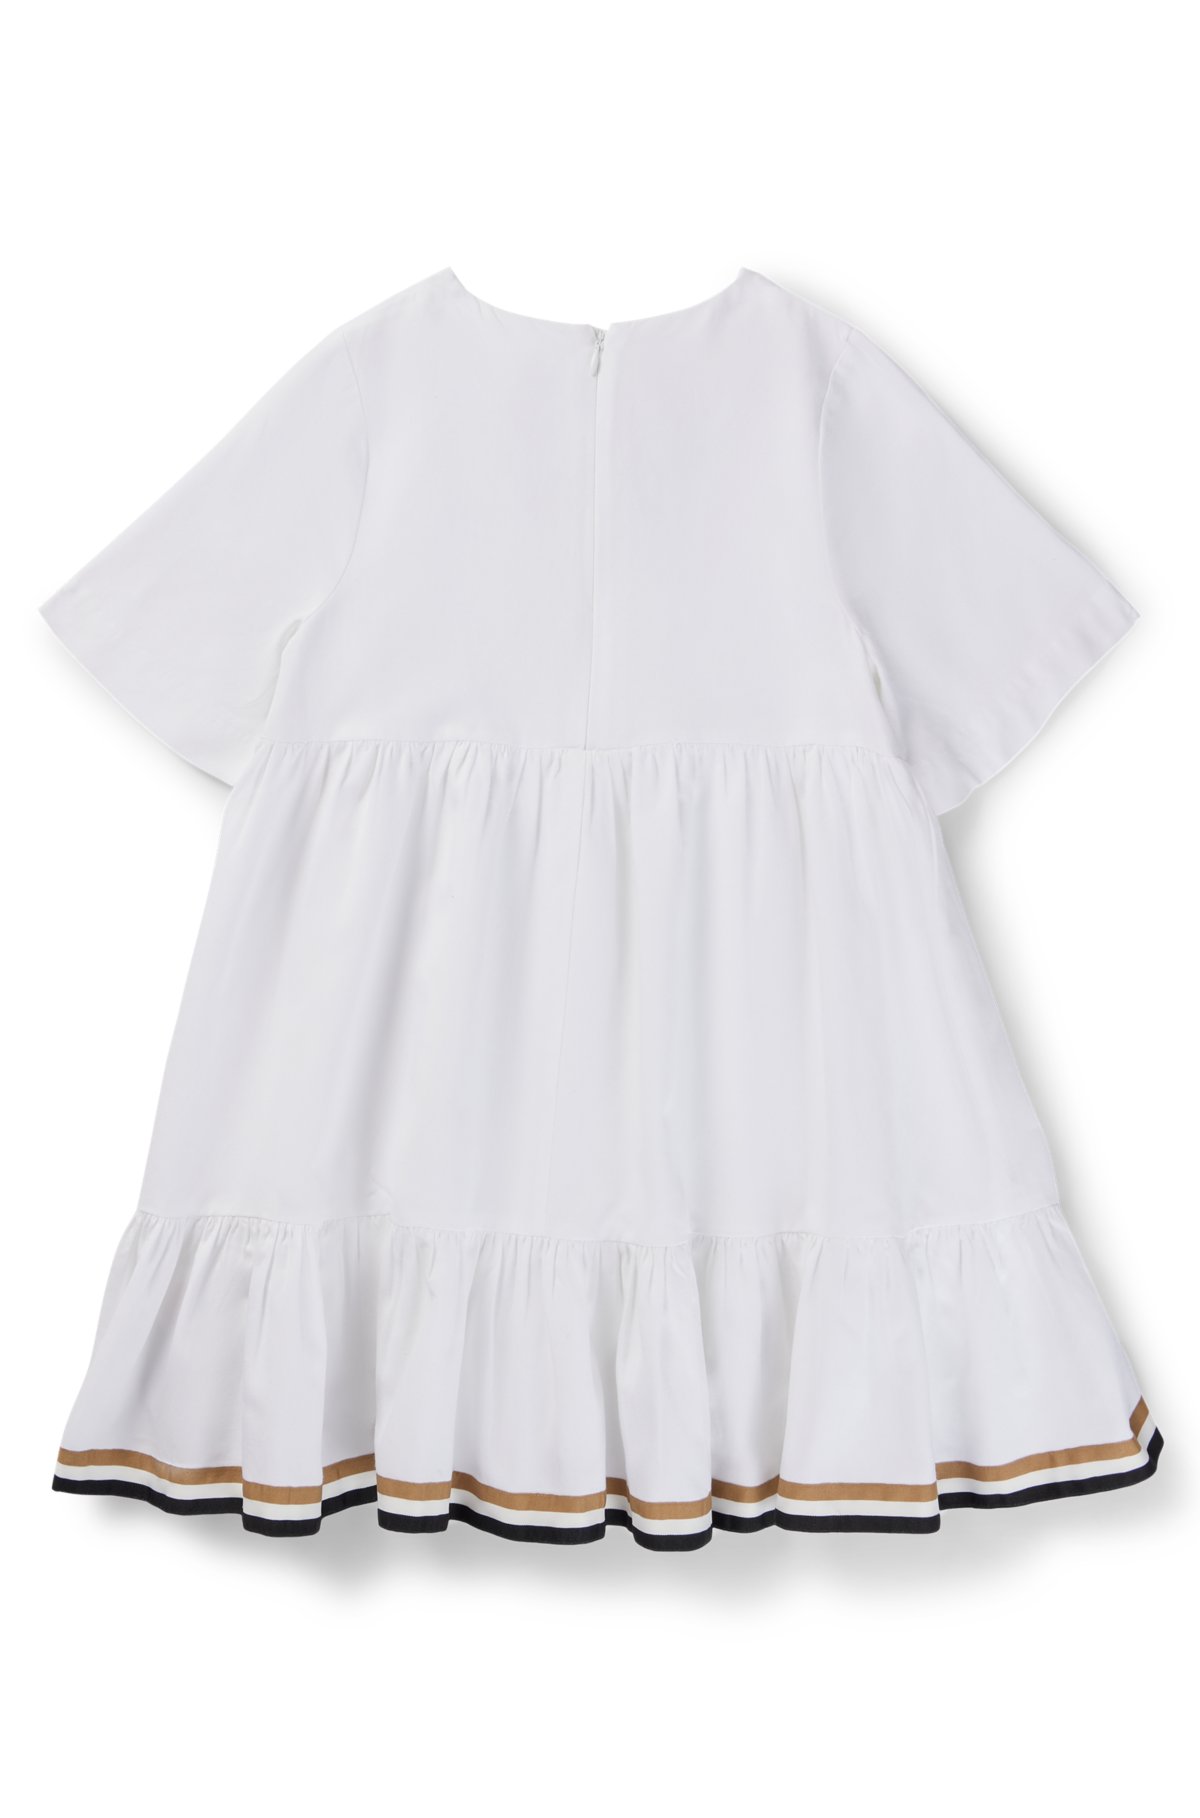 Kids' cropped-sleeved dress with signature stripes and logo, White